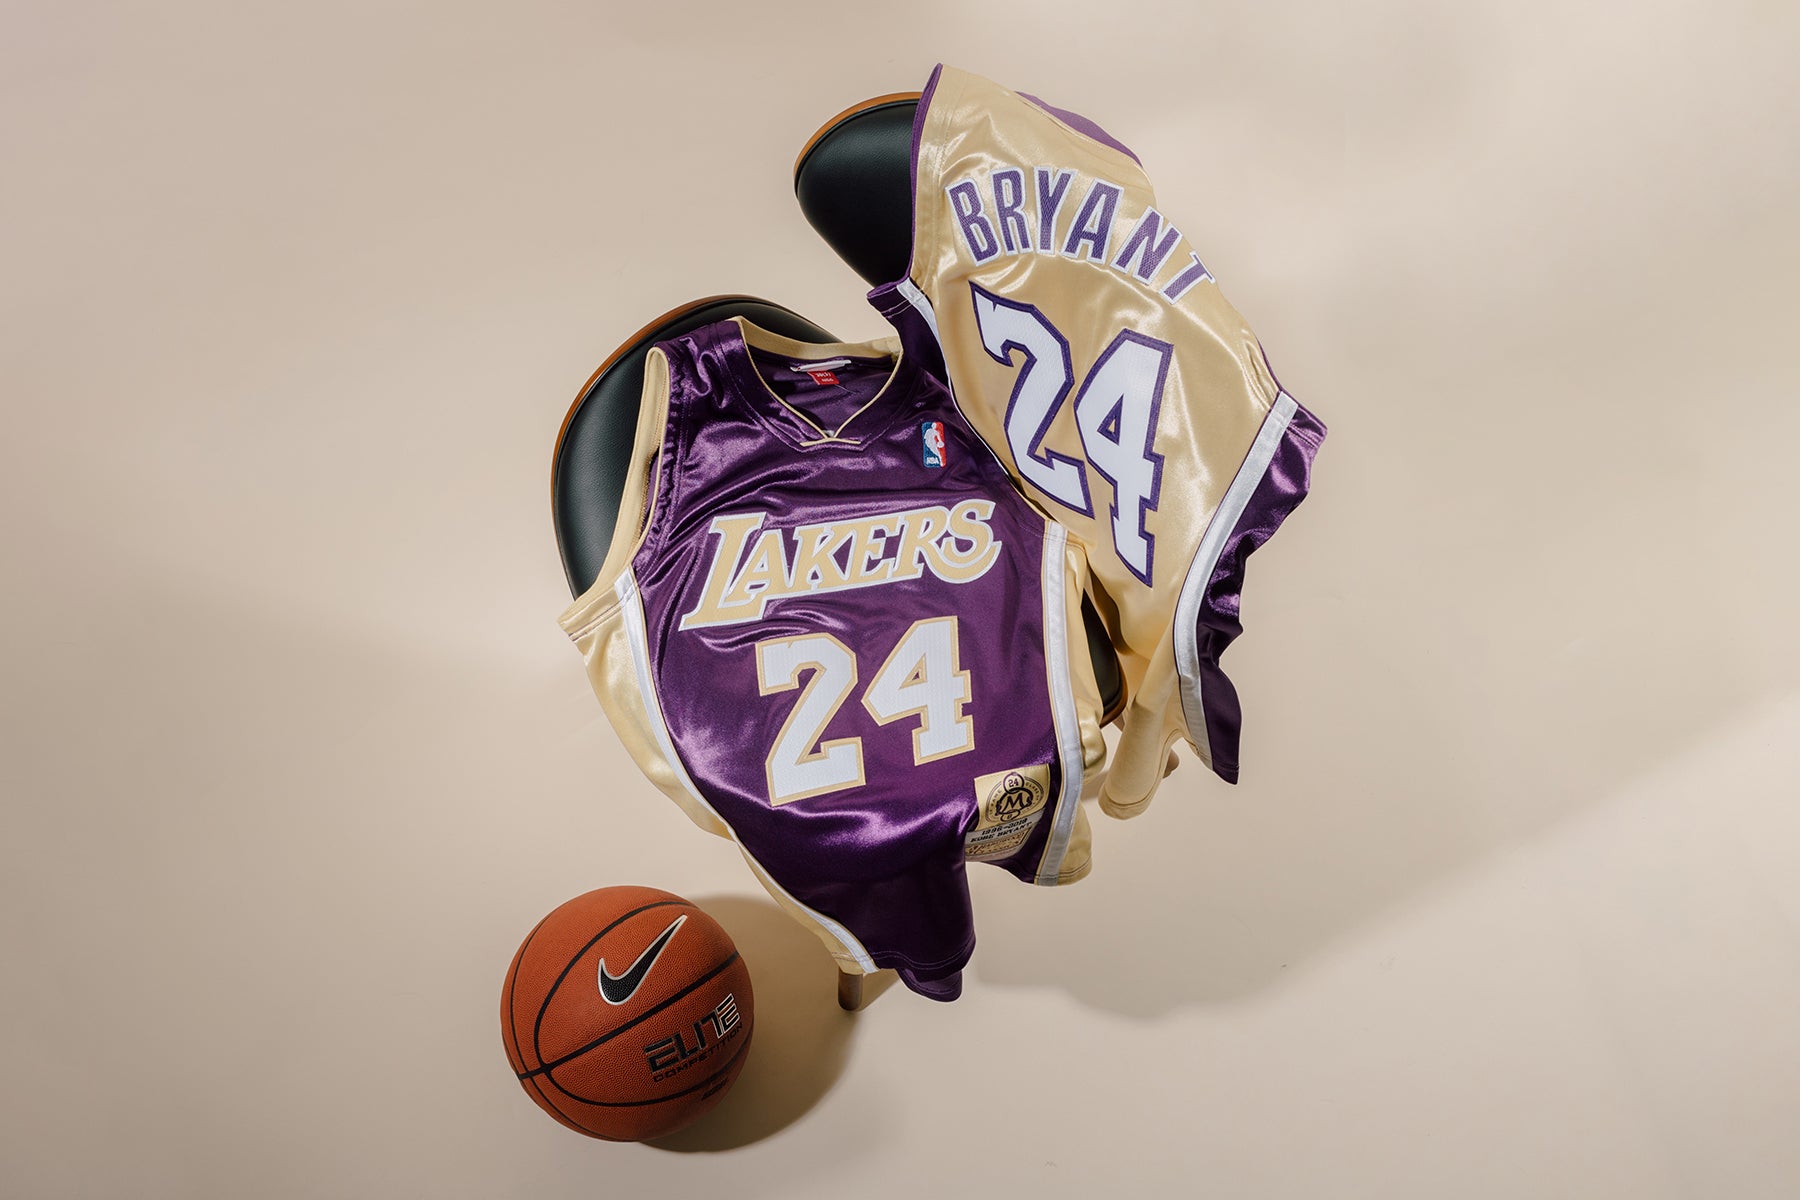 K. Bryant 8 Los Angeles Yellow Retro Basketball Jersey with League